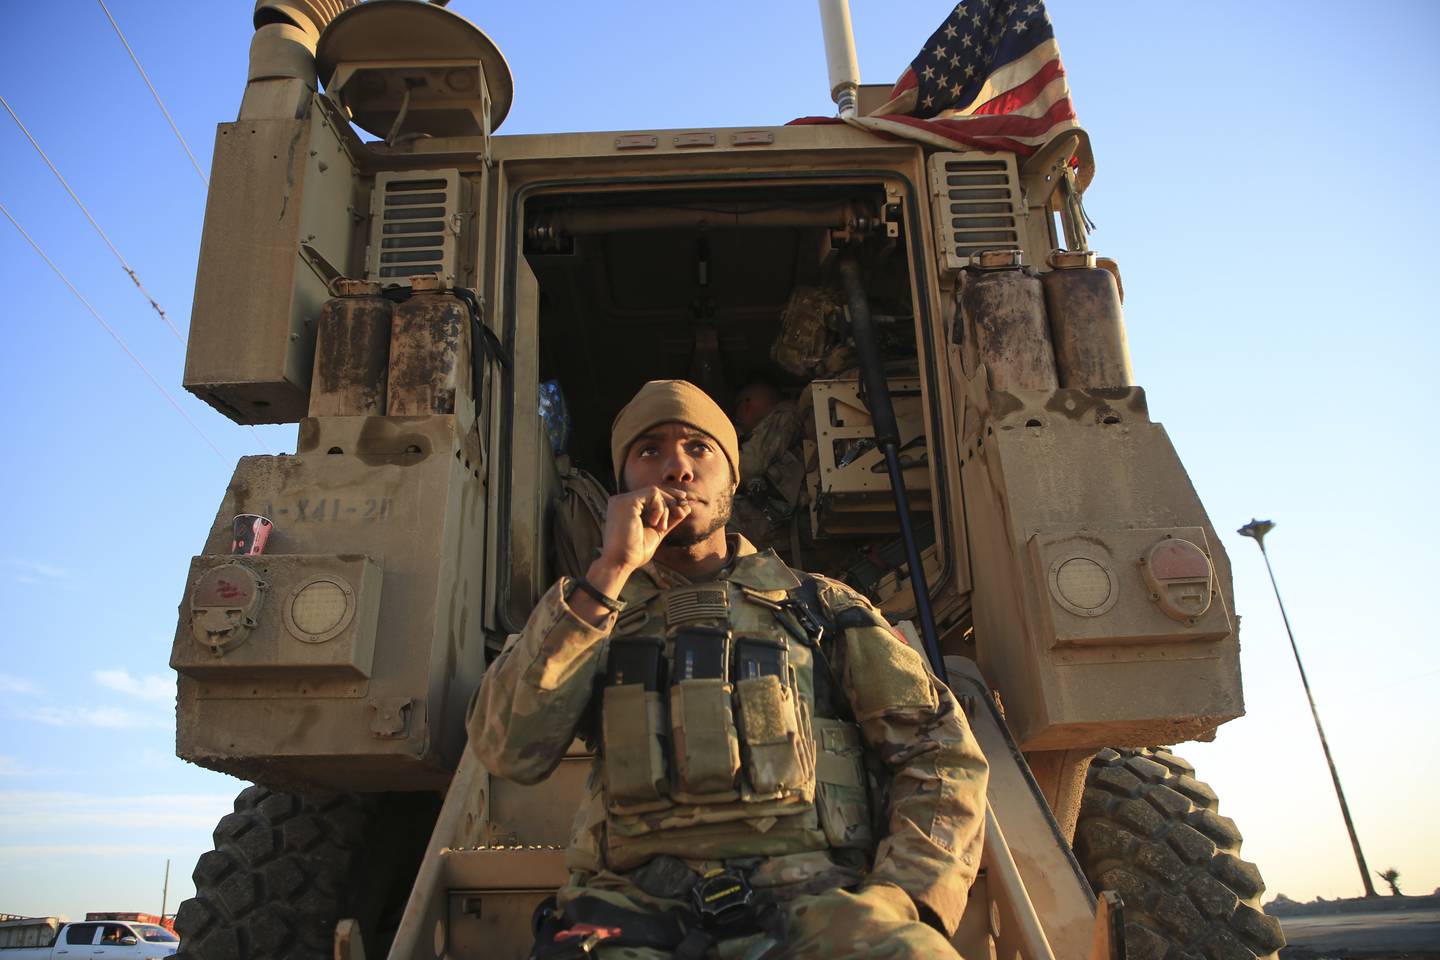 A US soldier in Hassakeh, Syria, in January after ISIS militants broke into the prison that houses more than 3,000 inmates, including hundreds of minors.  AP